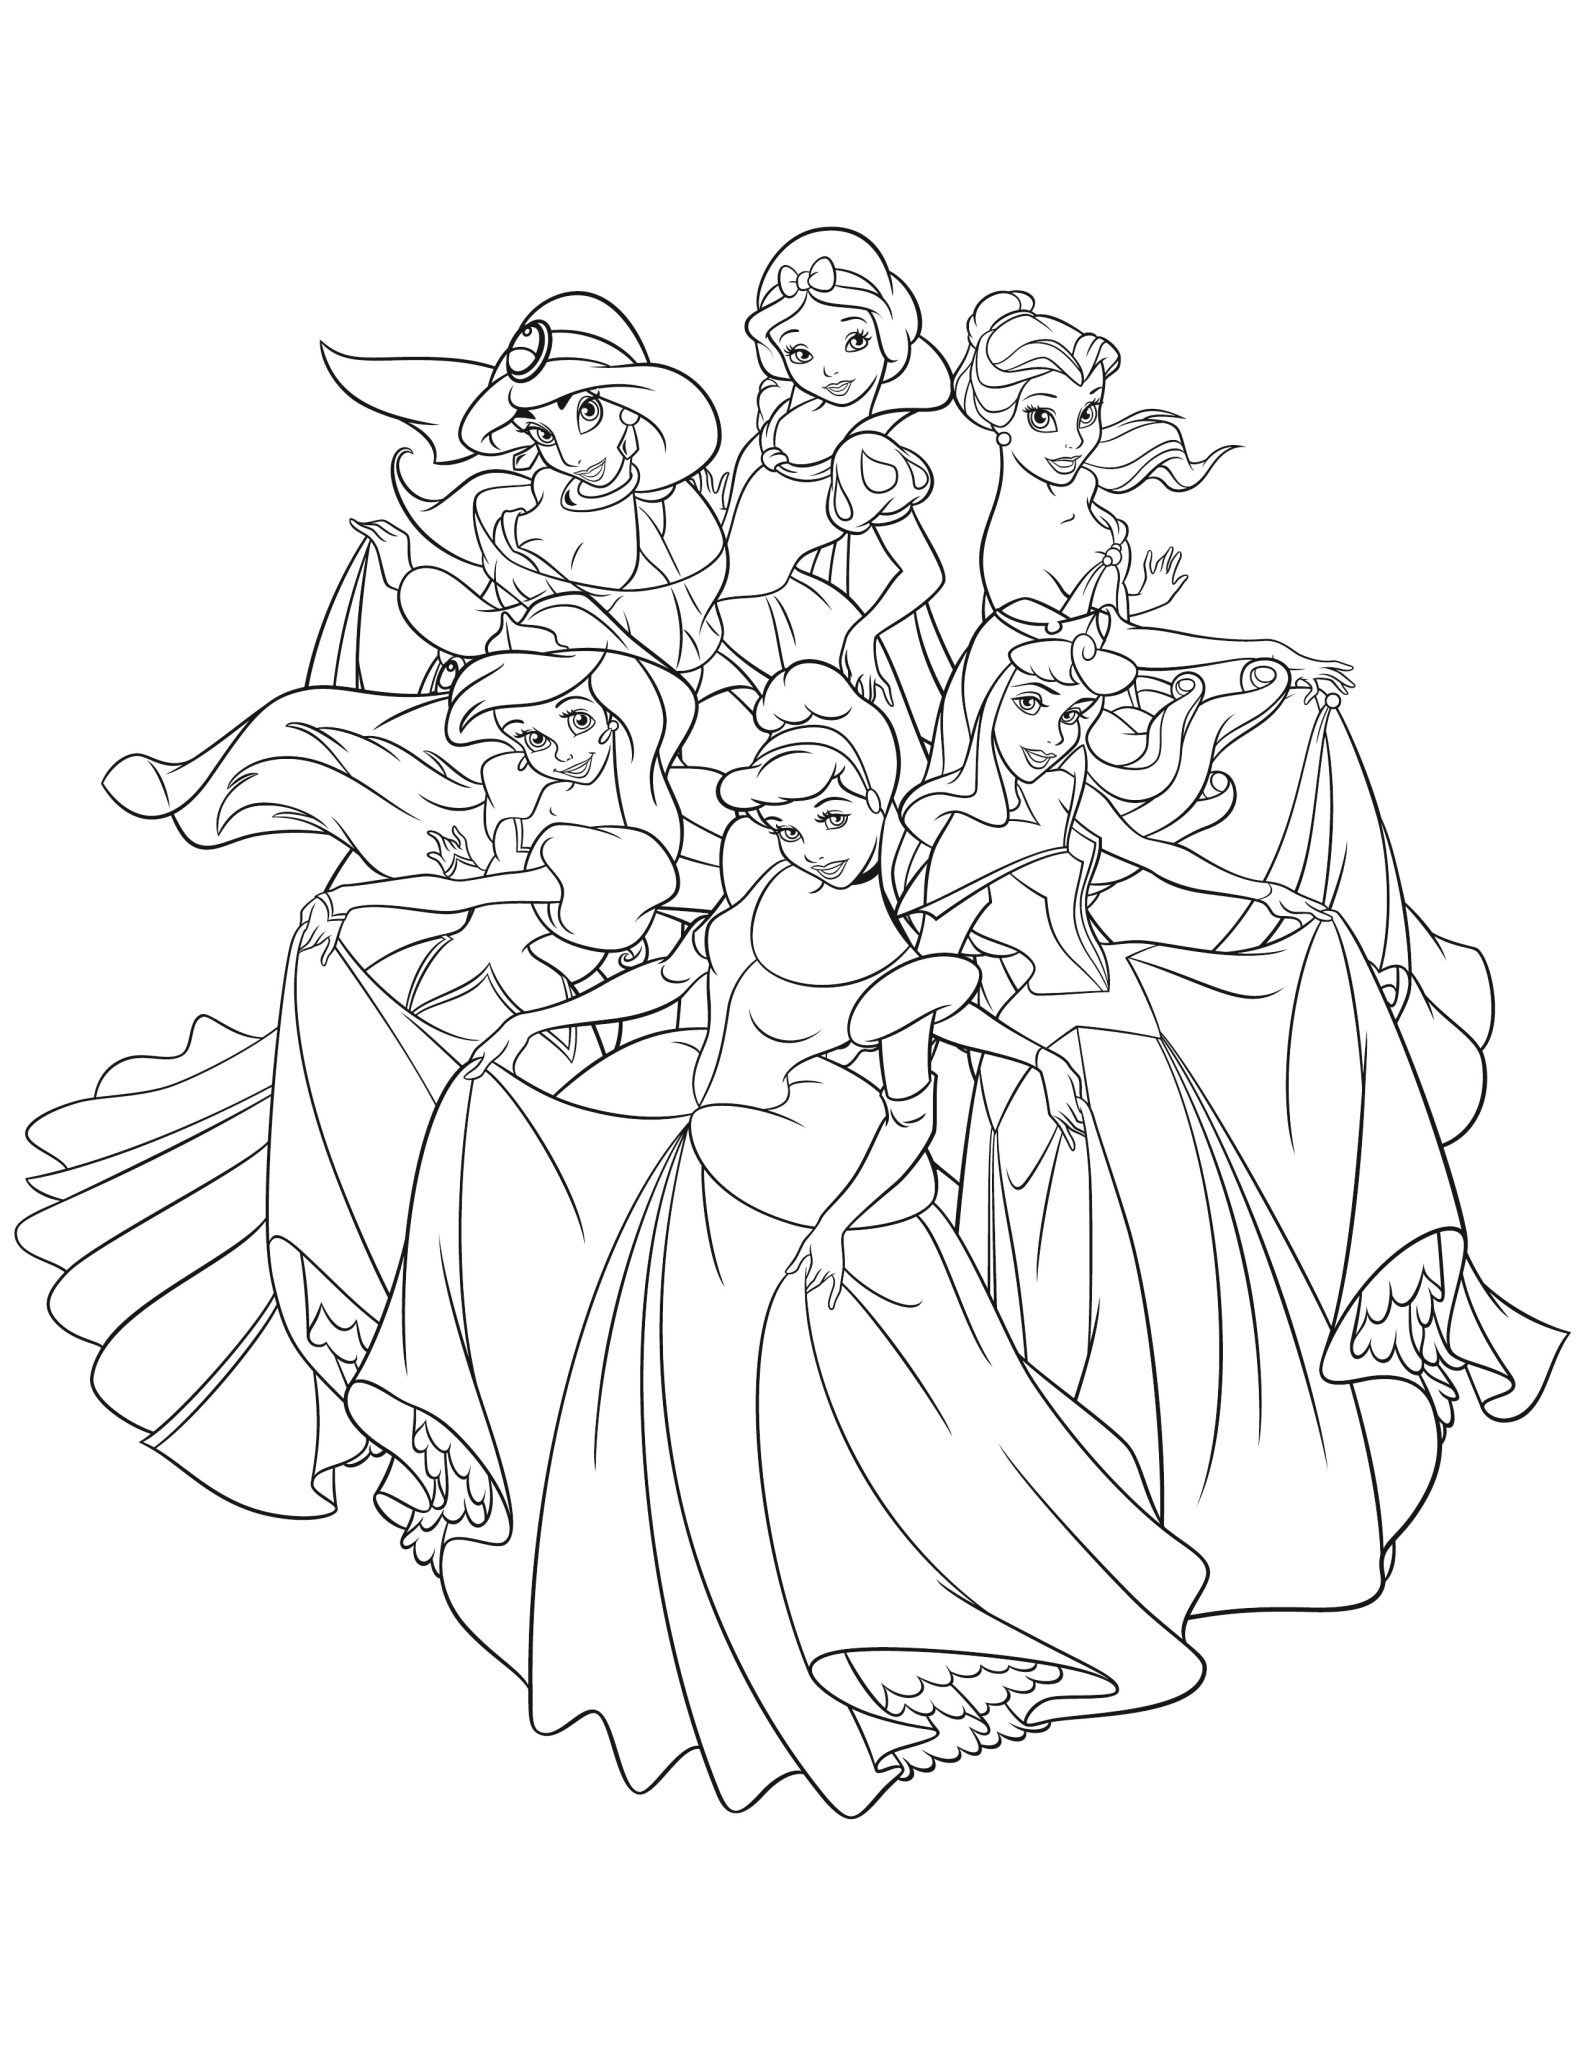 Disney Discovery- Disney Princess Adult Coloring Book - Discovery 